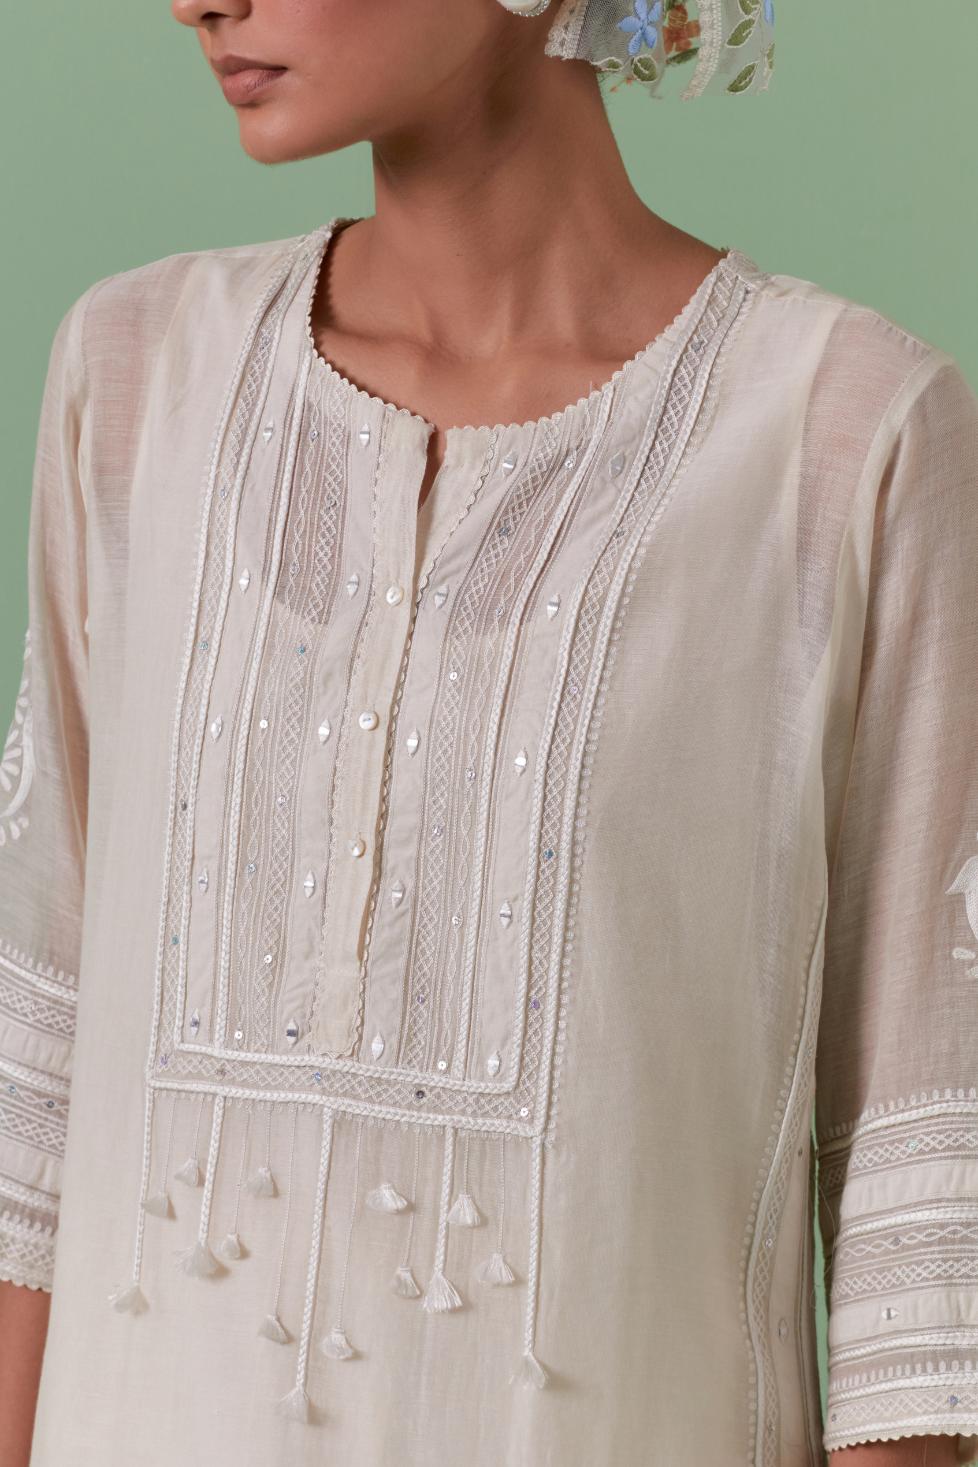 Off-white cotton chanderi straight kurta set with yoke with patchwork and silk thread embroidery highlighted with mirror, sequins, tassels and braids.